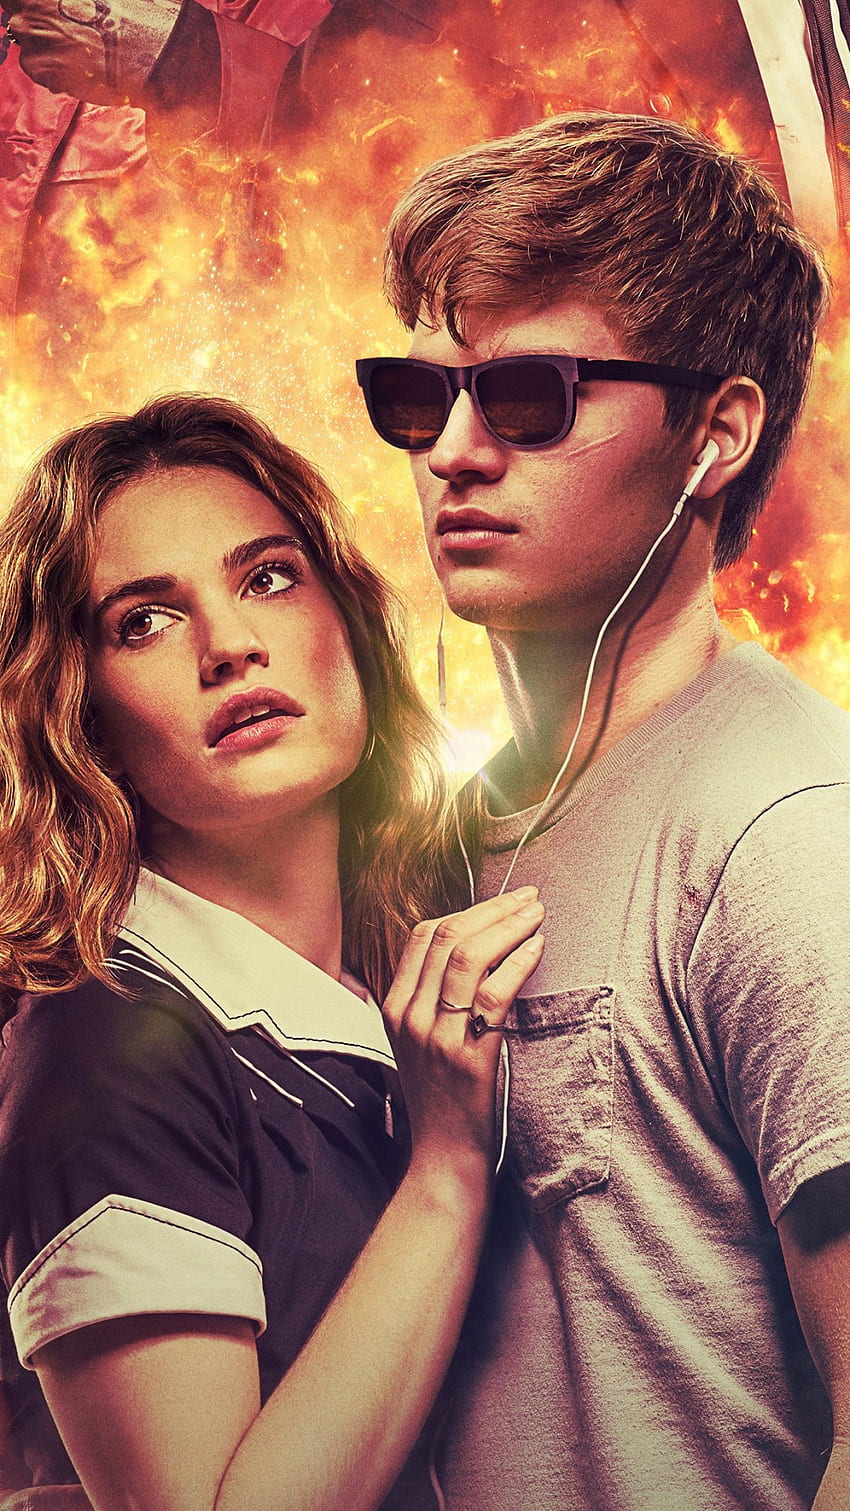 Baby Driver, Ansel Elgort, Lily James for iPhone 8, iPhone 7 Plus, iPhone 6+, Sony Xperia Z, HTC One, Baby Driver iPhone HD 전화 배경 화면